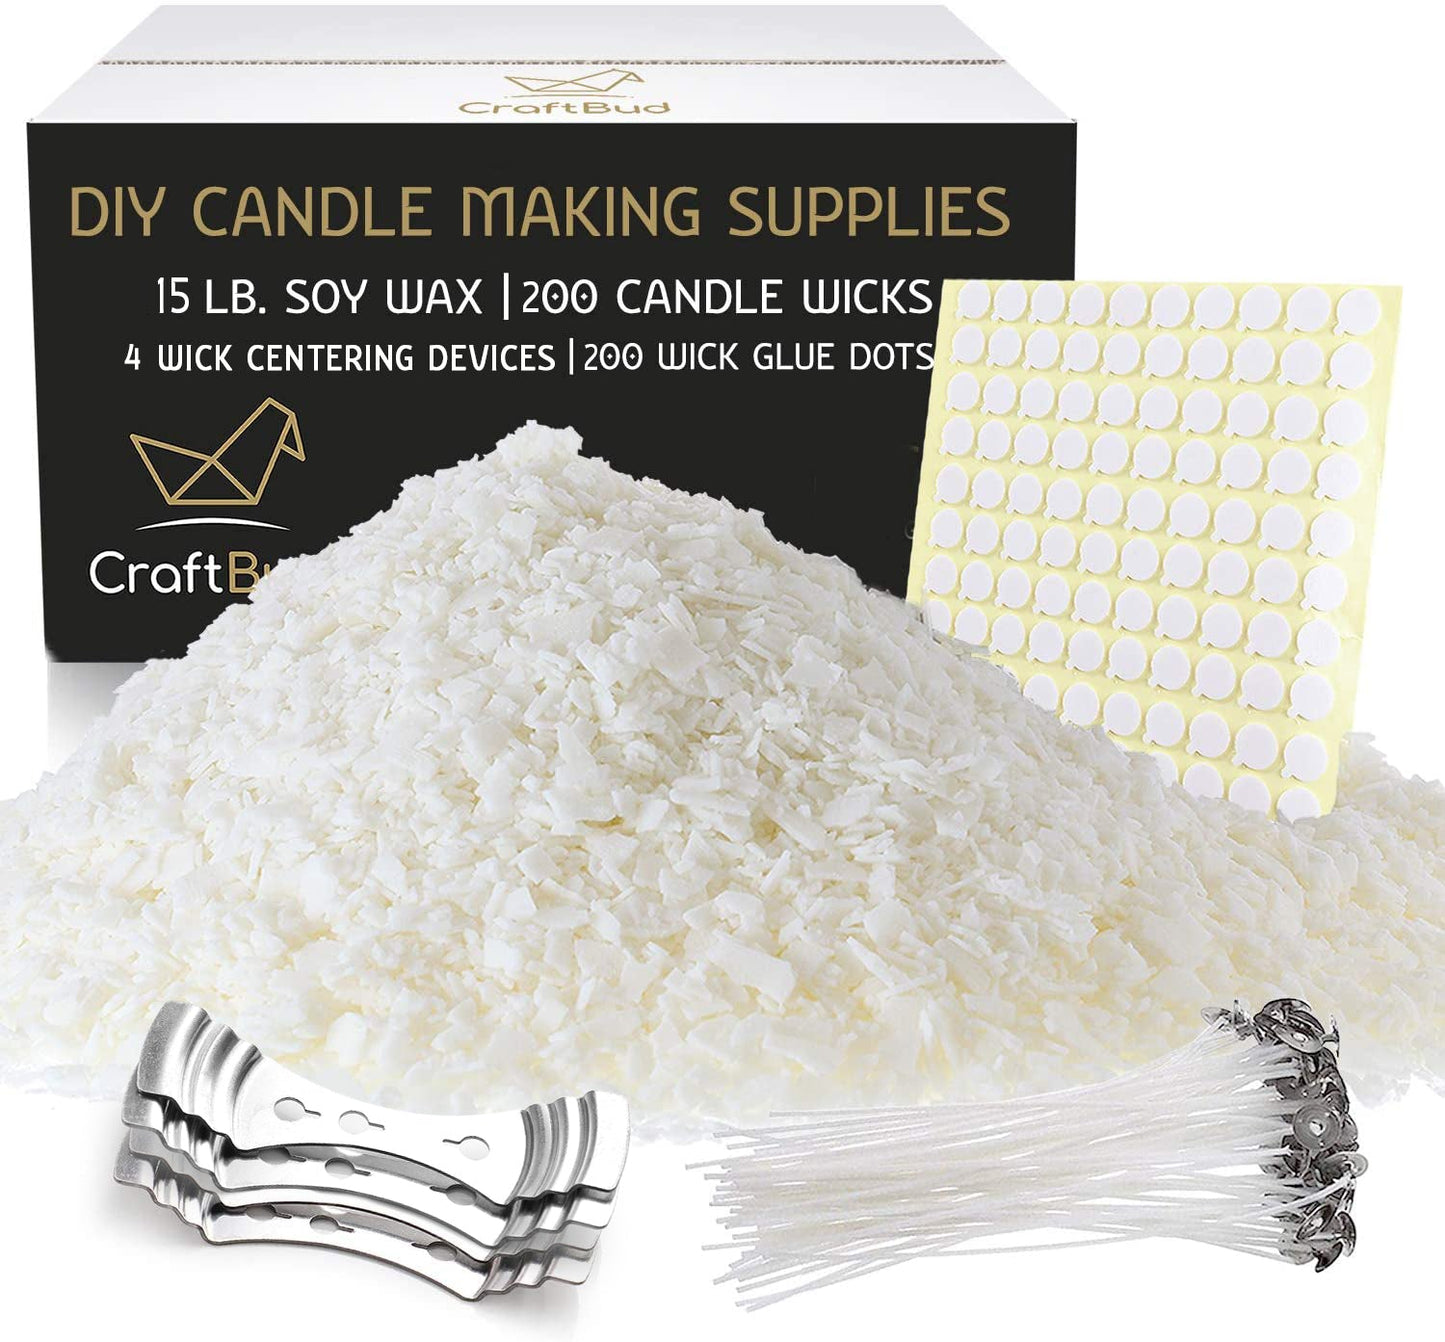 15 lb Natural Soy Candle Wax for Candle Making with Cotton Candle Wicks, Wick Stickers, and Centering Devices